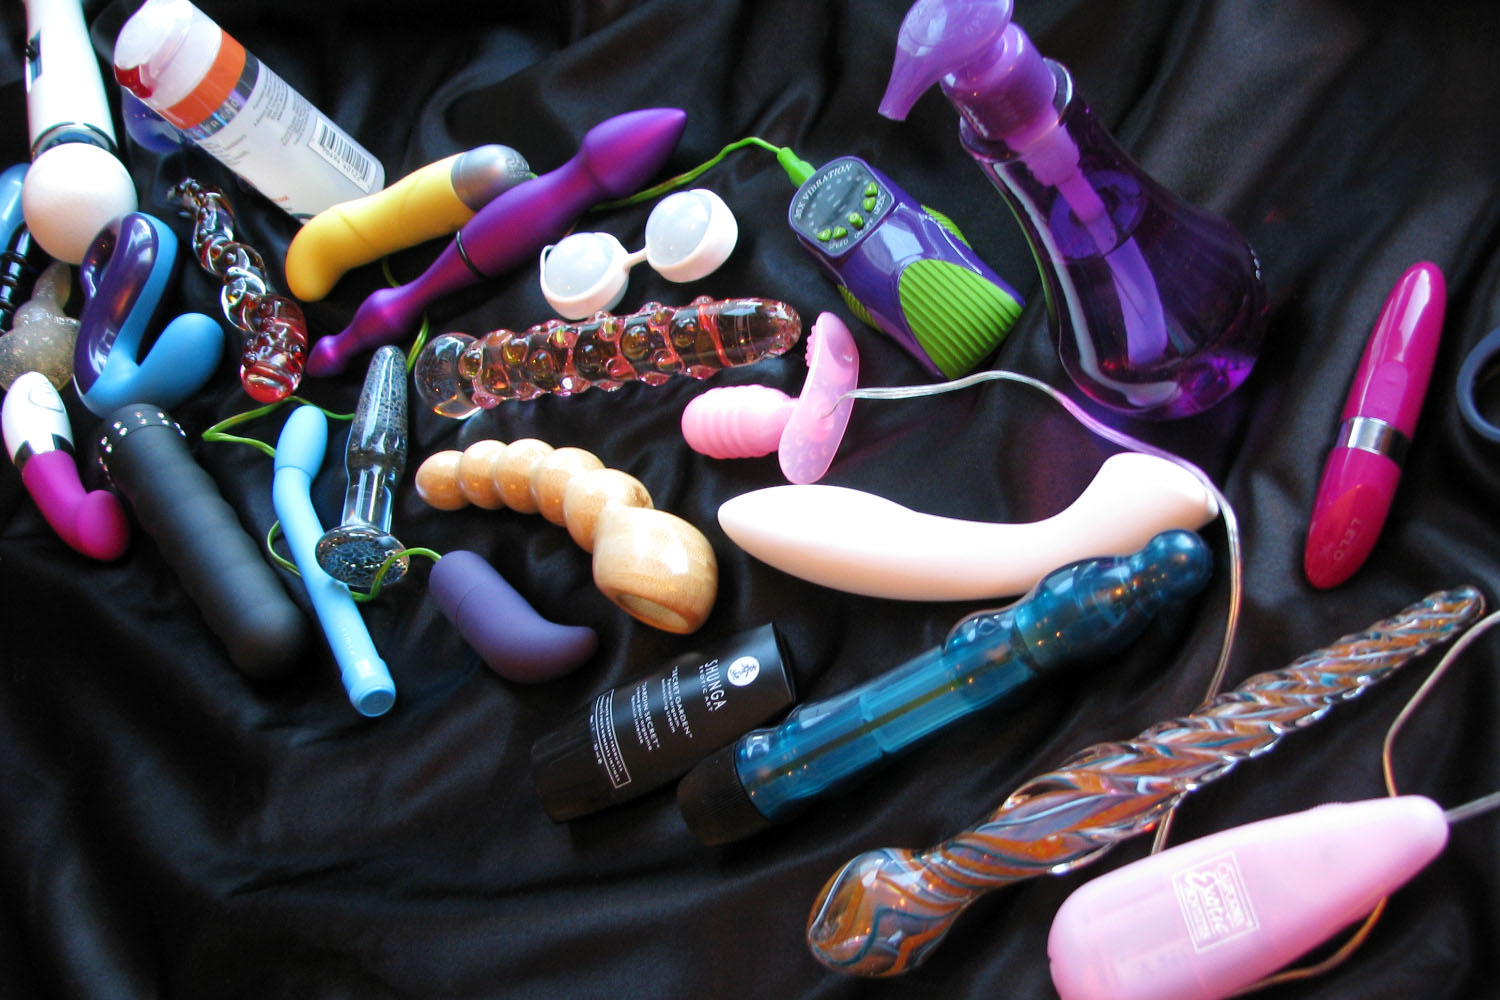 Bondage Gear and Sex Toys